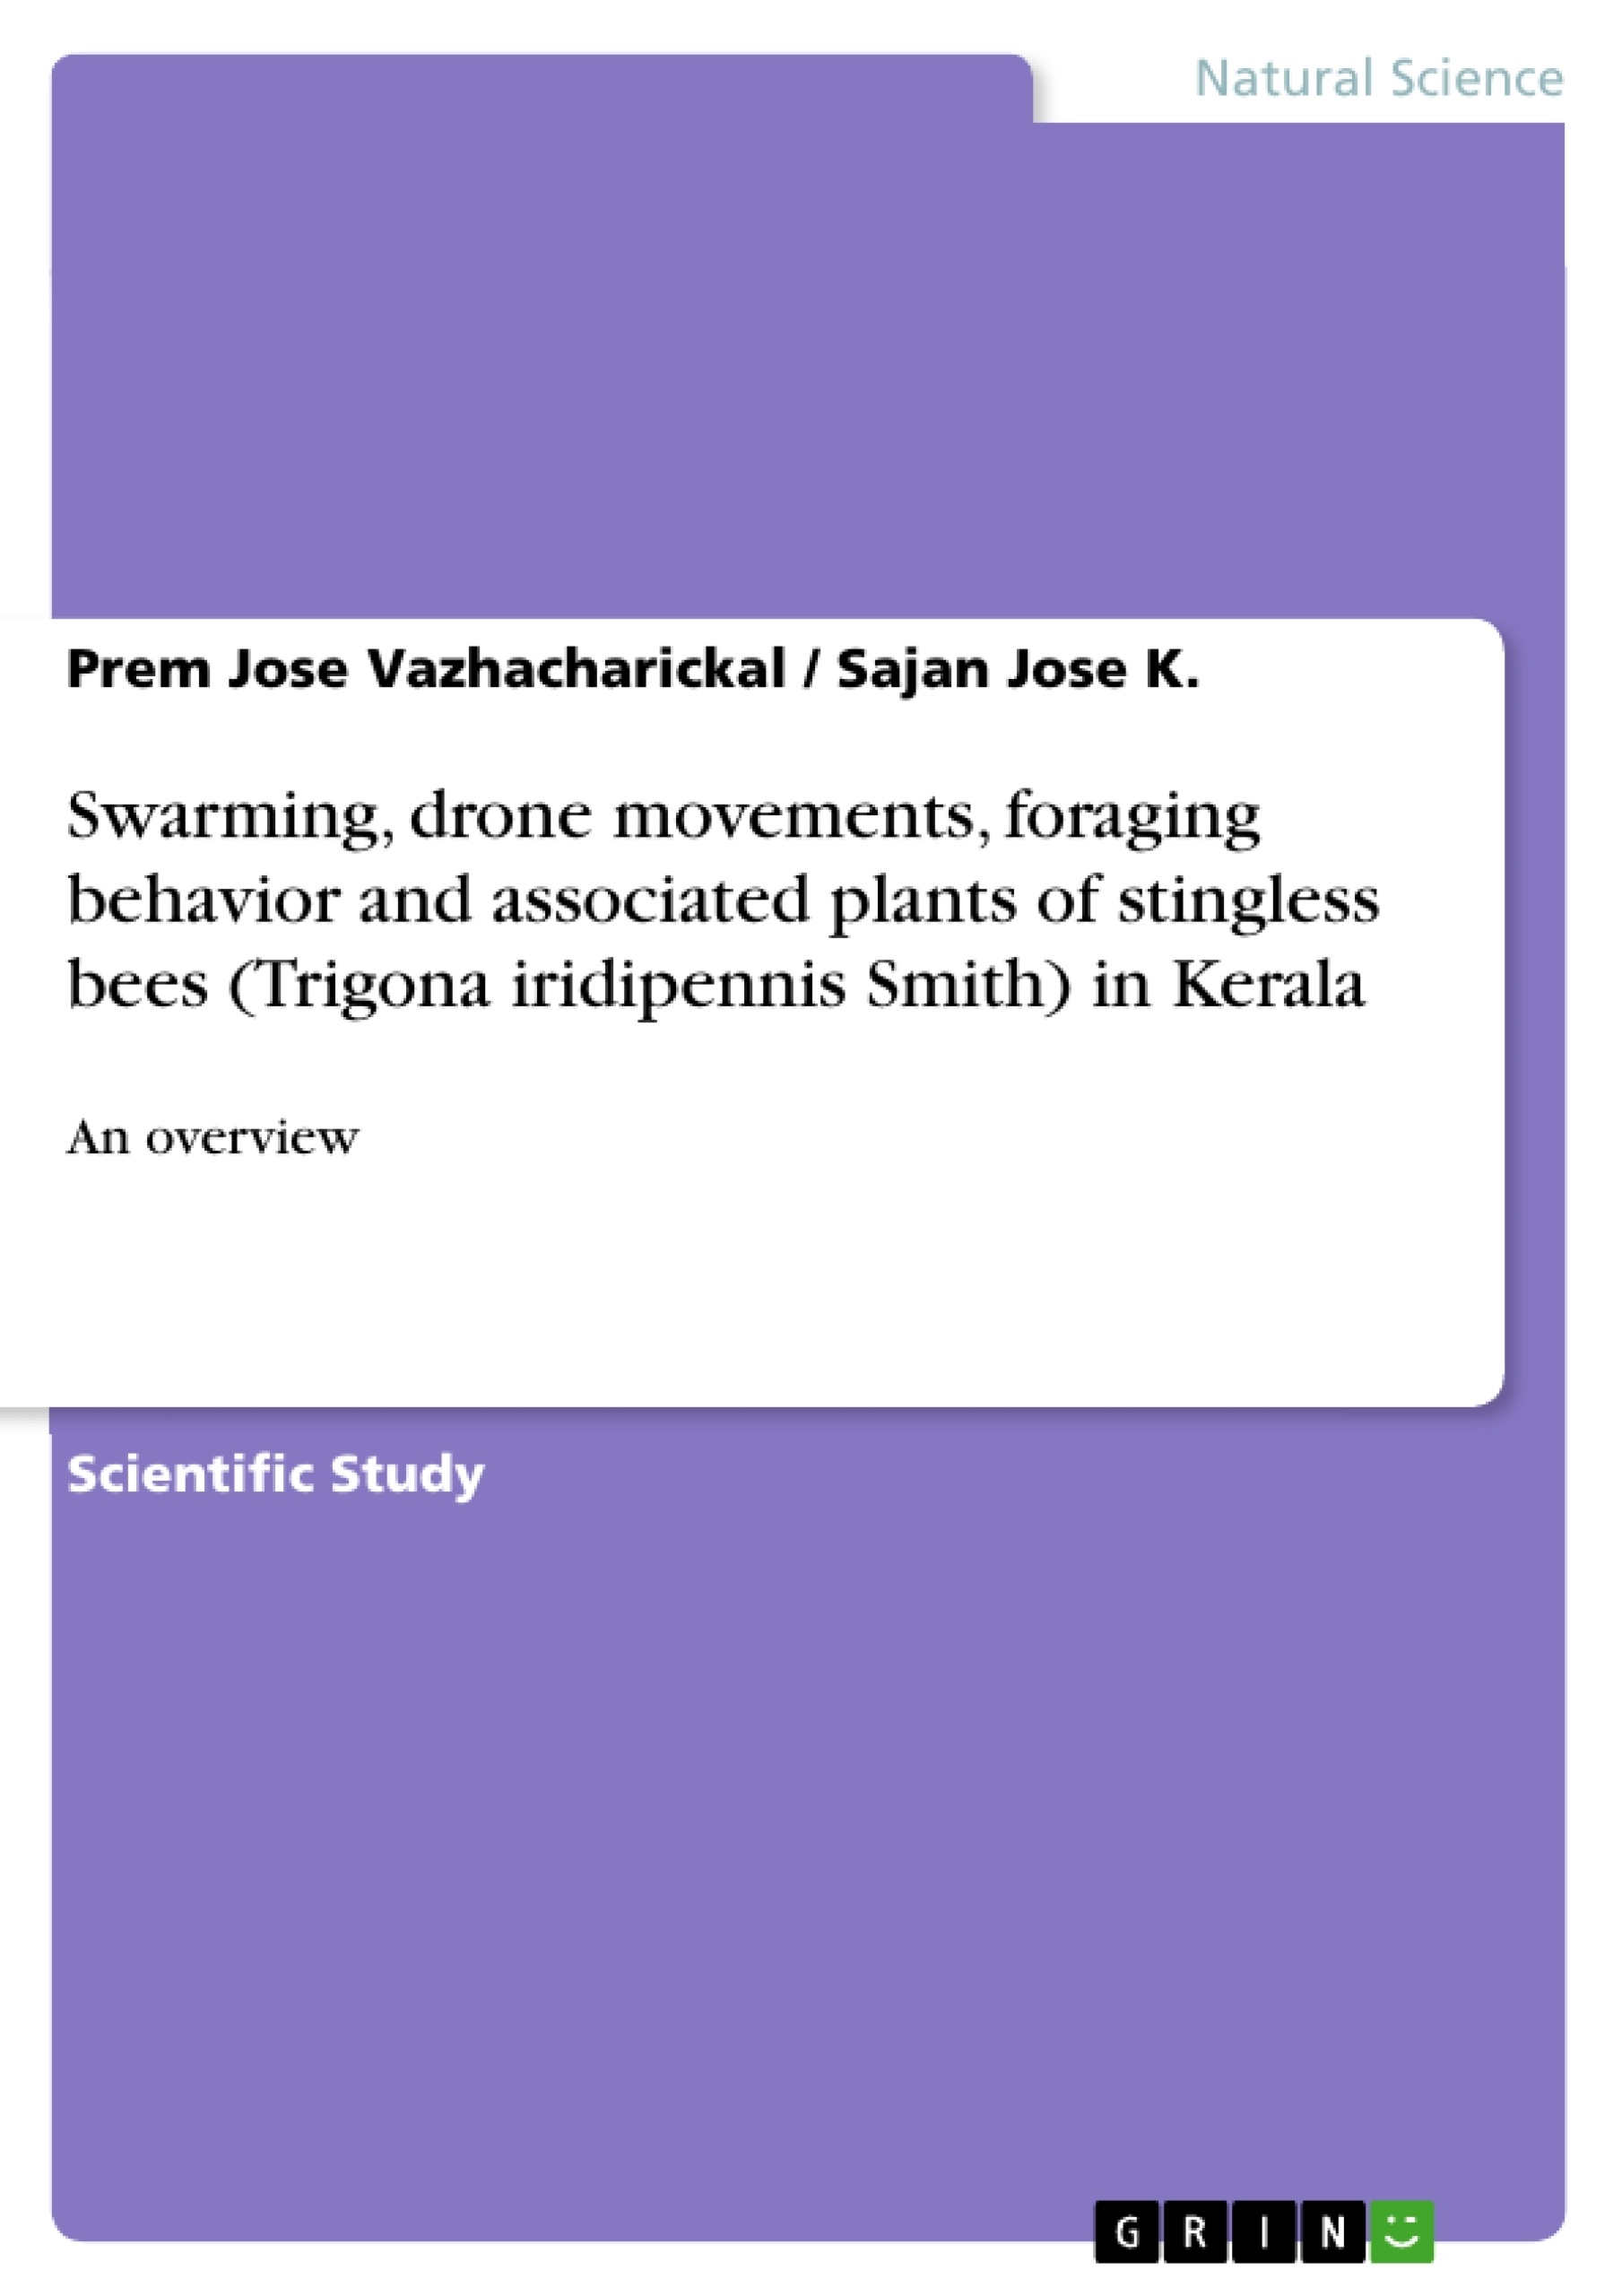 Título: Swarming, drone movements, foraging behavior and associated plants of stingless bees (Trigona iridipennis Smith) in Kerala